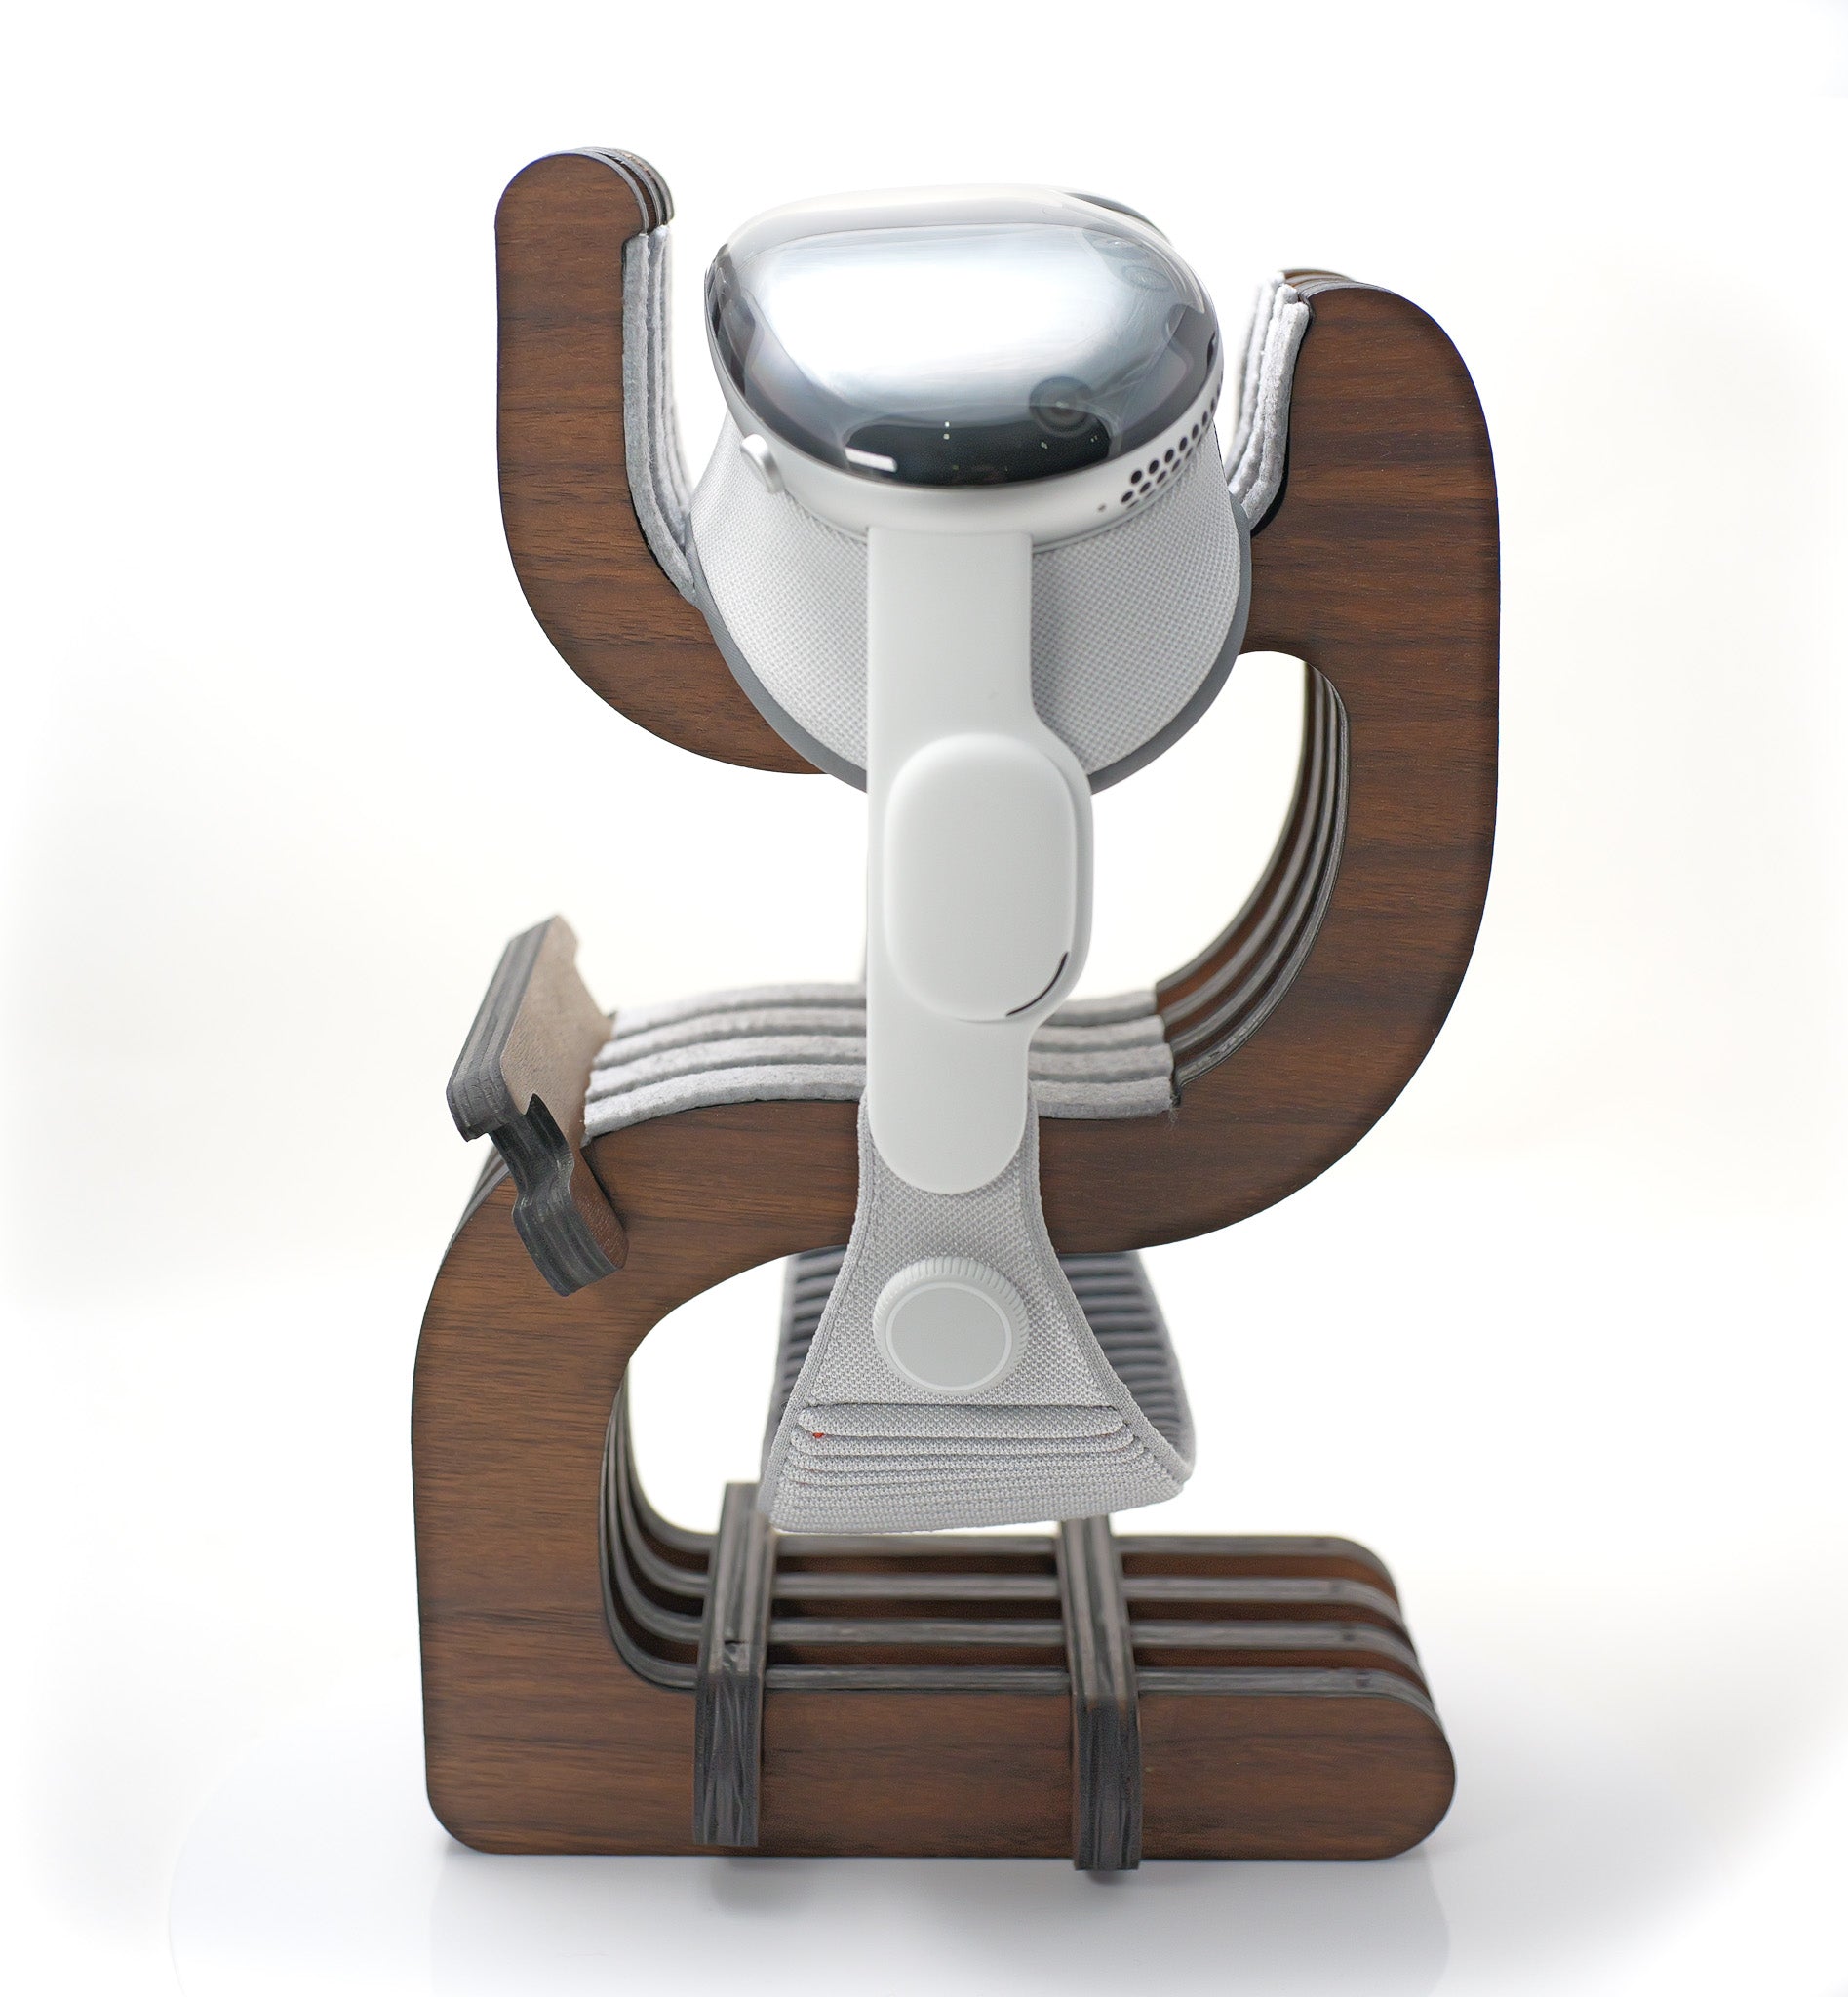 *PREORDER* Apple Vision Pro Stand Walnut Swerve Stand